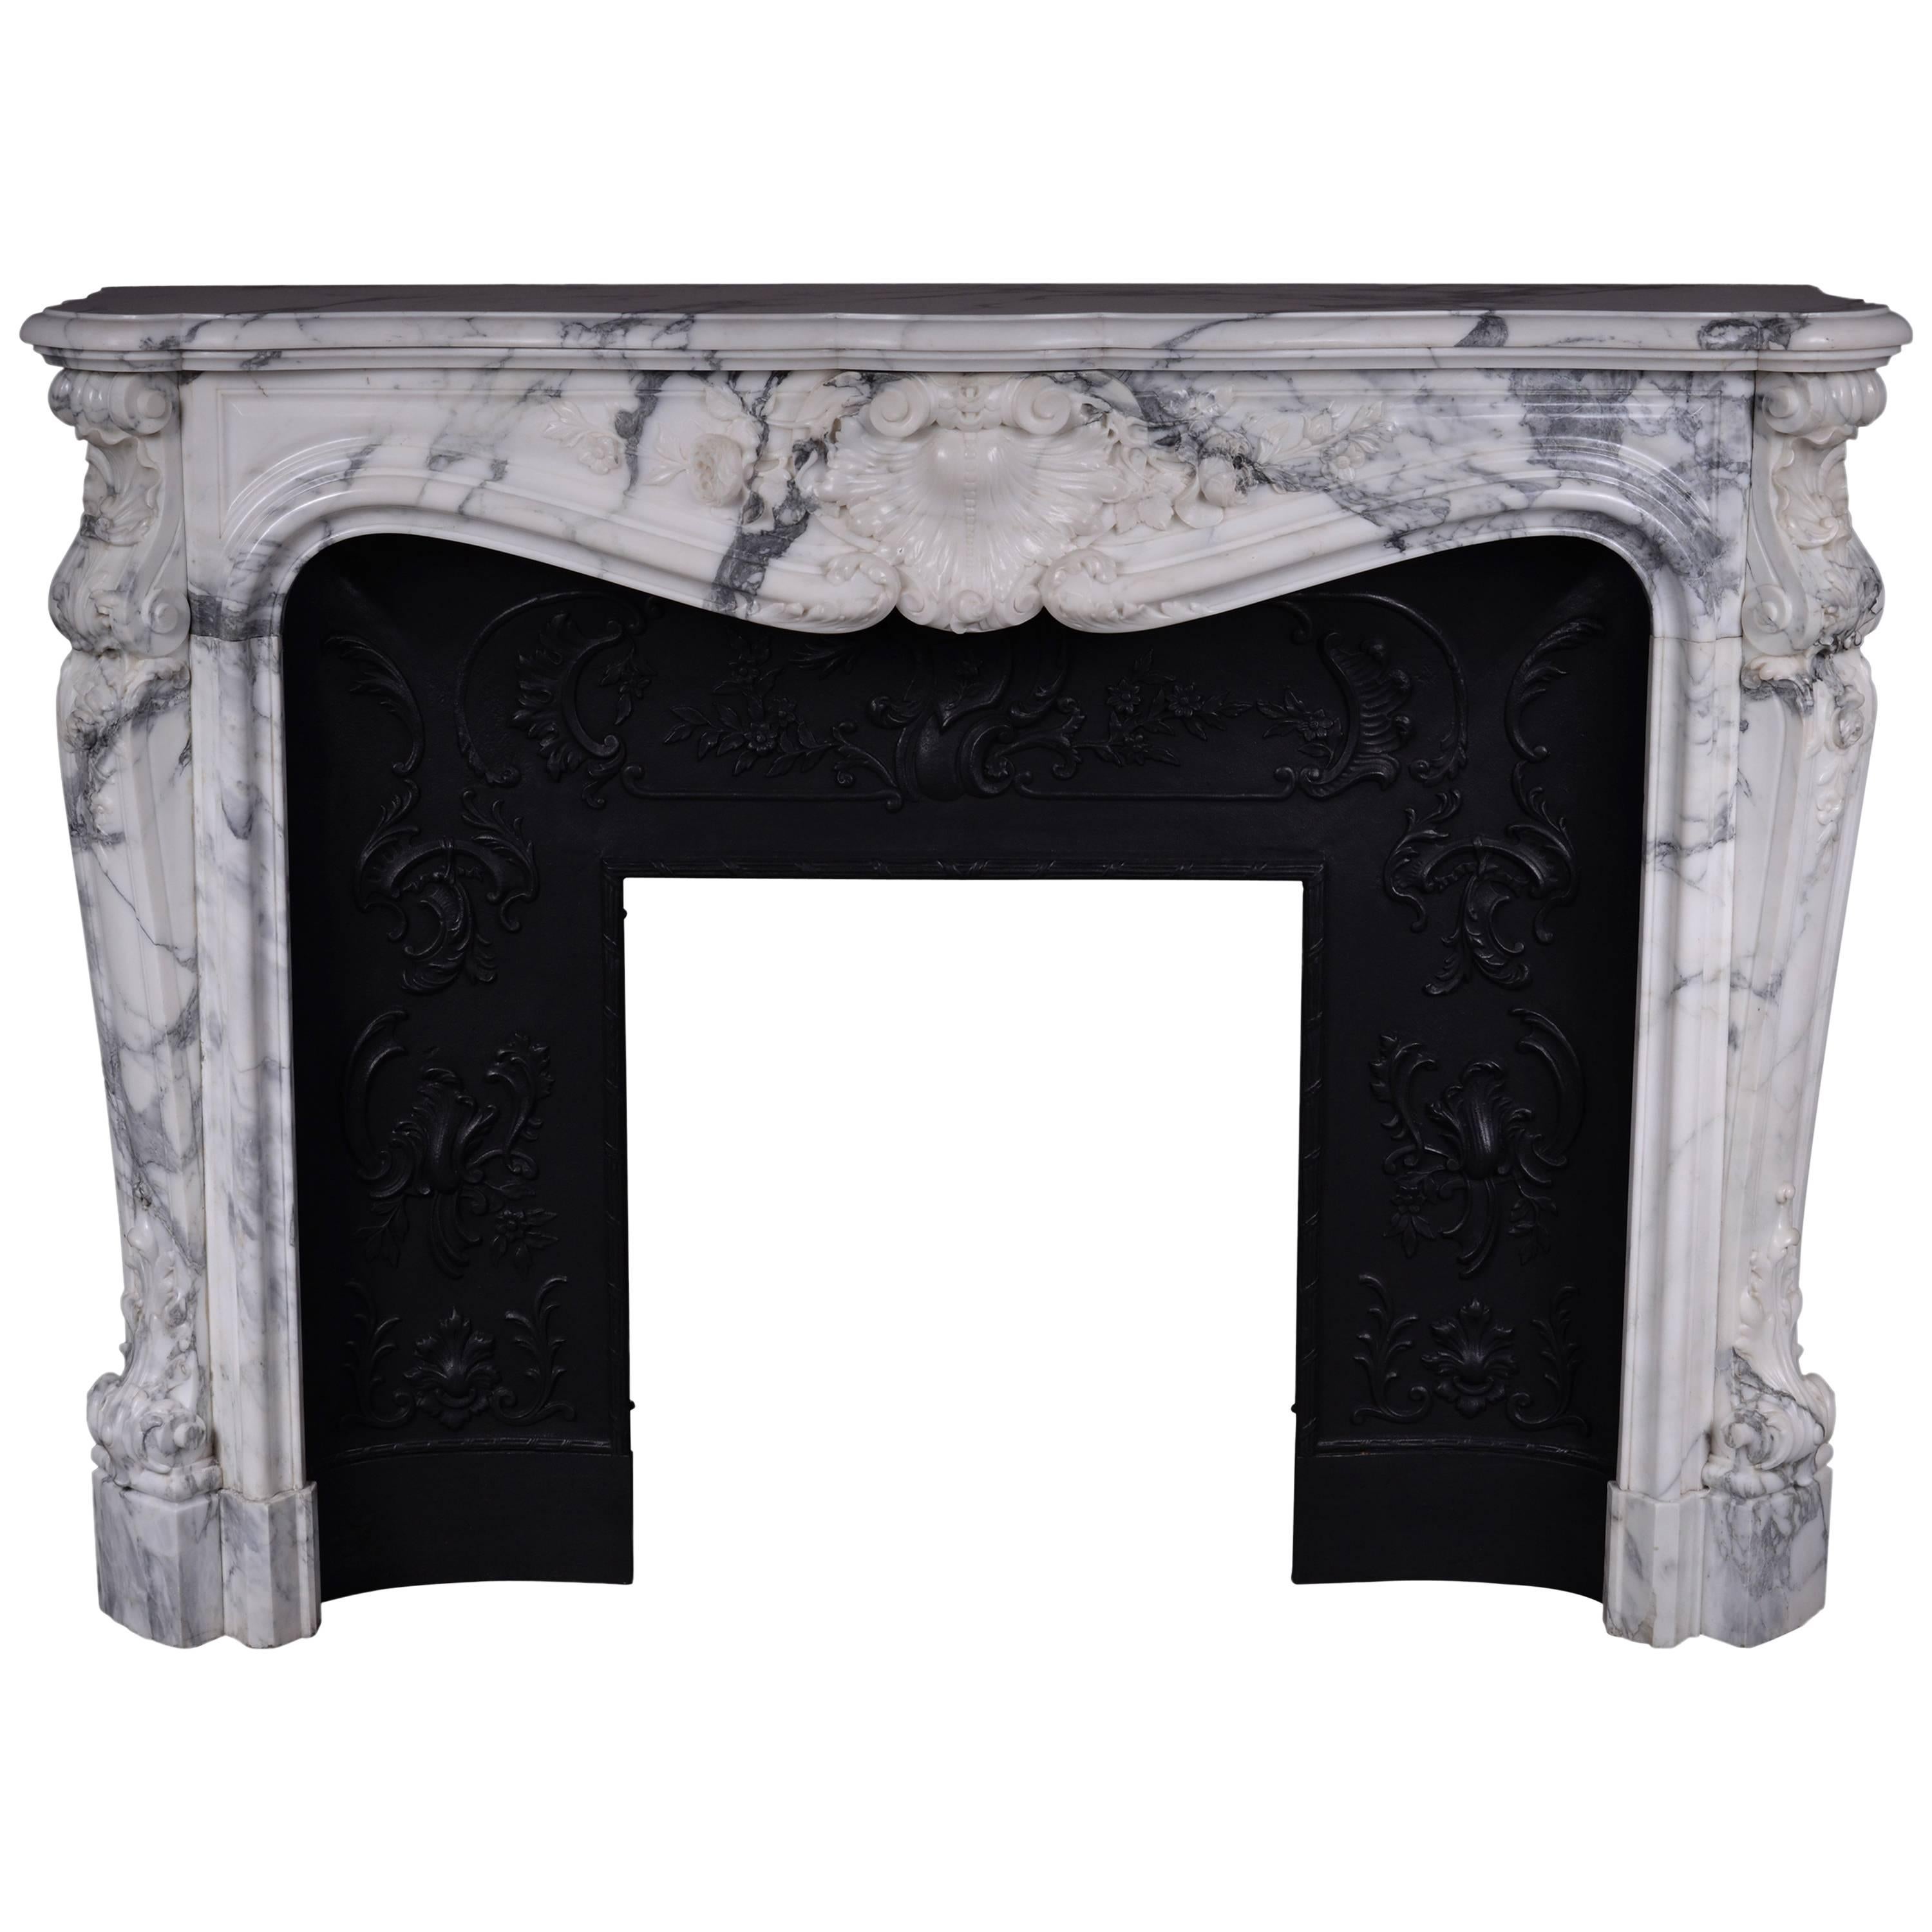 Antique Louis XV Style Fireplace in Arabescato Marble with Cast Iron Insert